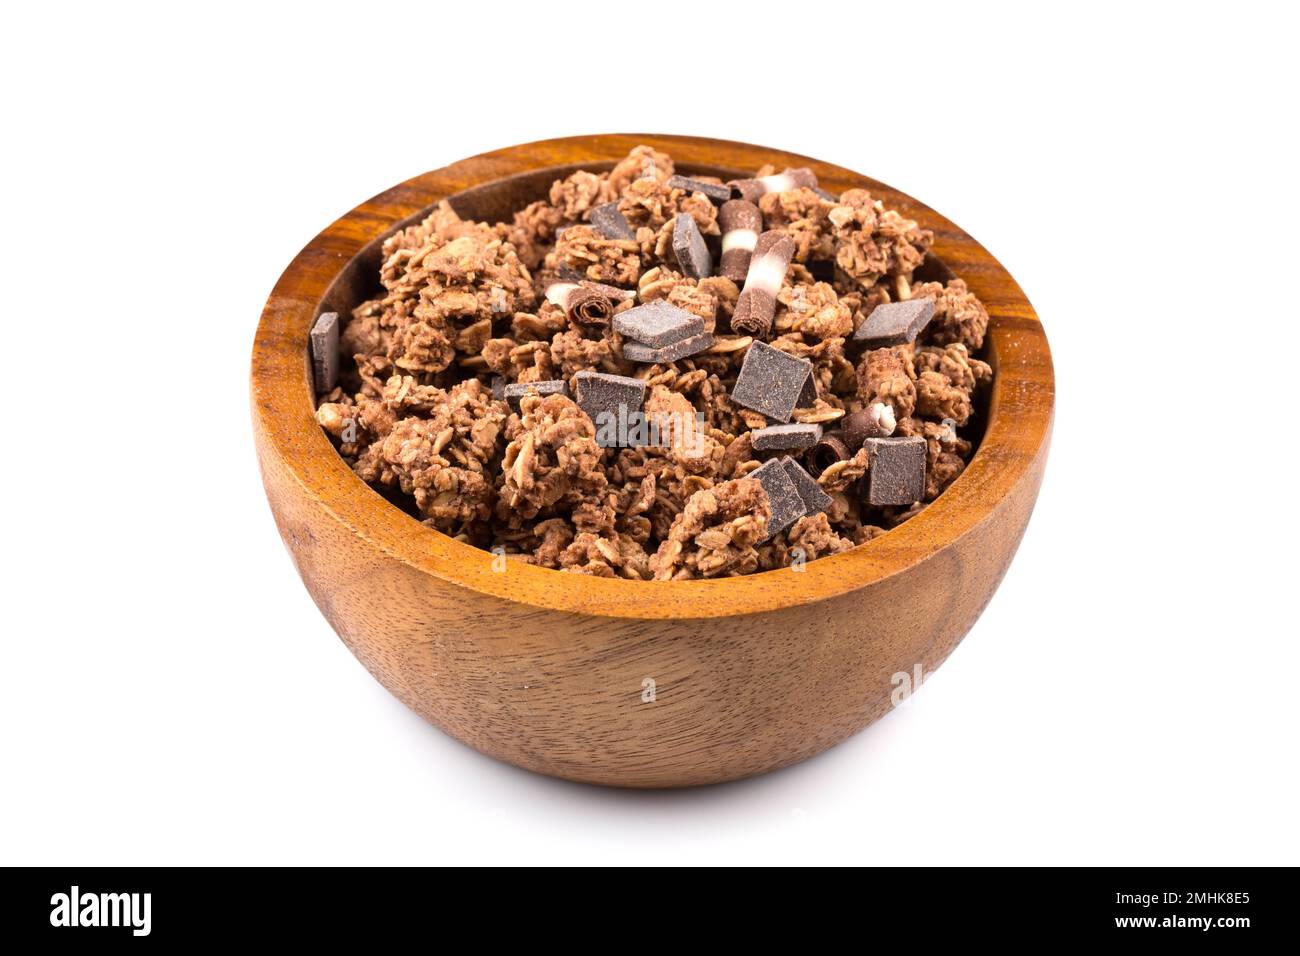 https://c8.alamy.com/comp/2MHK8E5/close-up-of-chocolate-muesli-with-pieces-of-chocolate-in-a-bowl-on-white-isolated-background-2MHK8E5.jpg